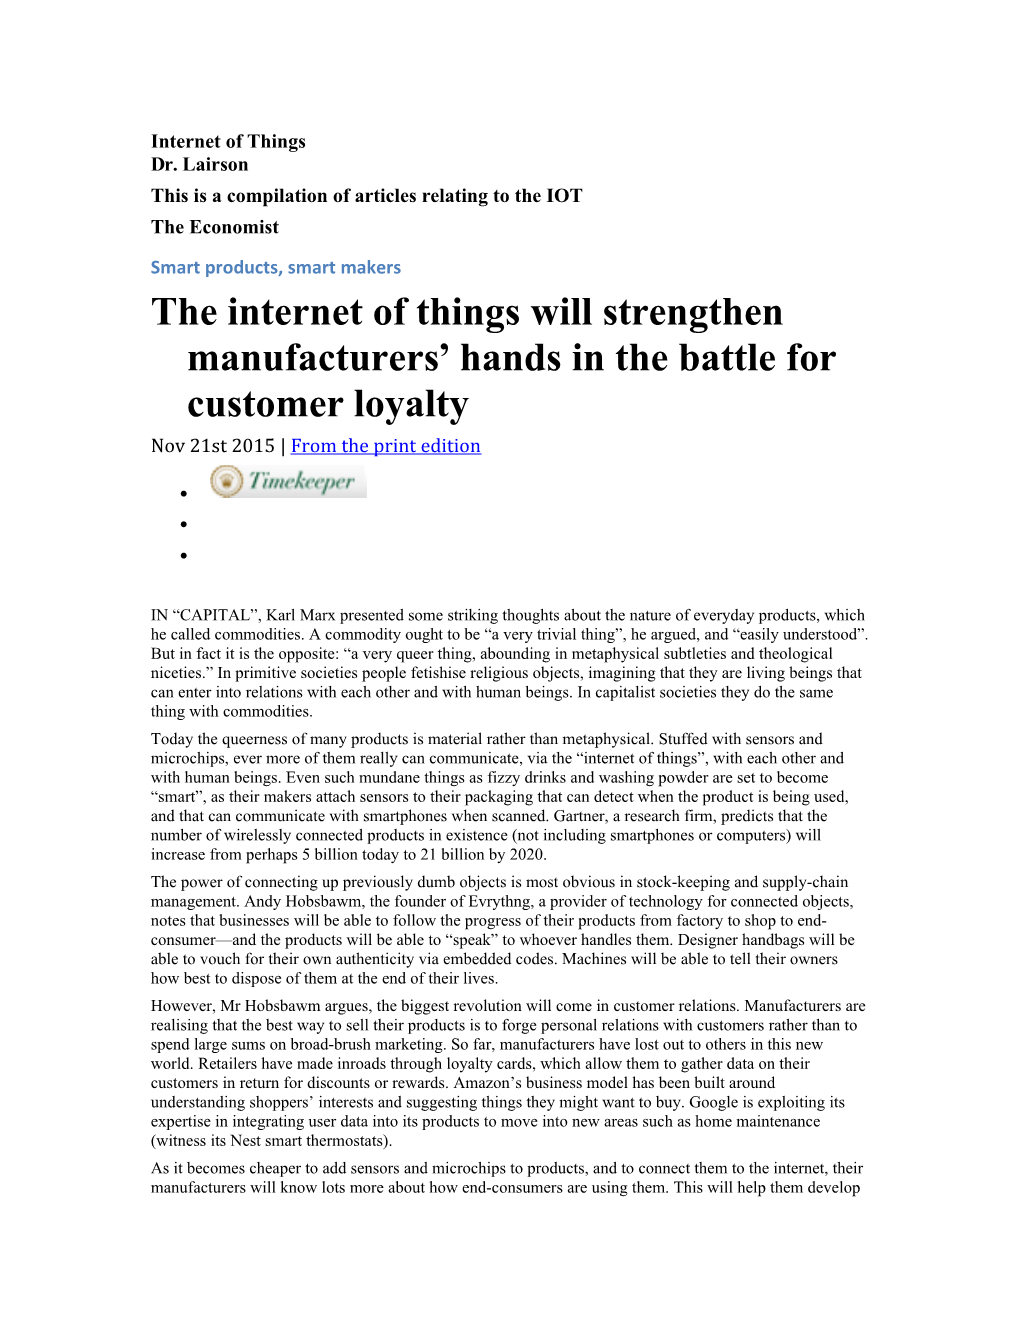 This Is a Compilation of Articles Relating to the IOT